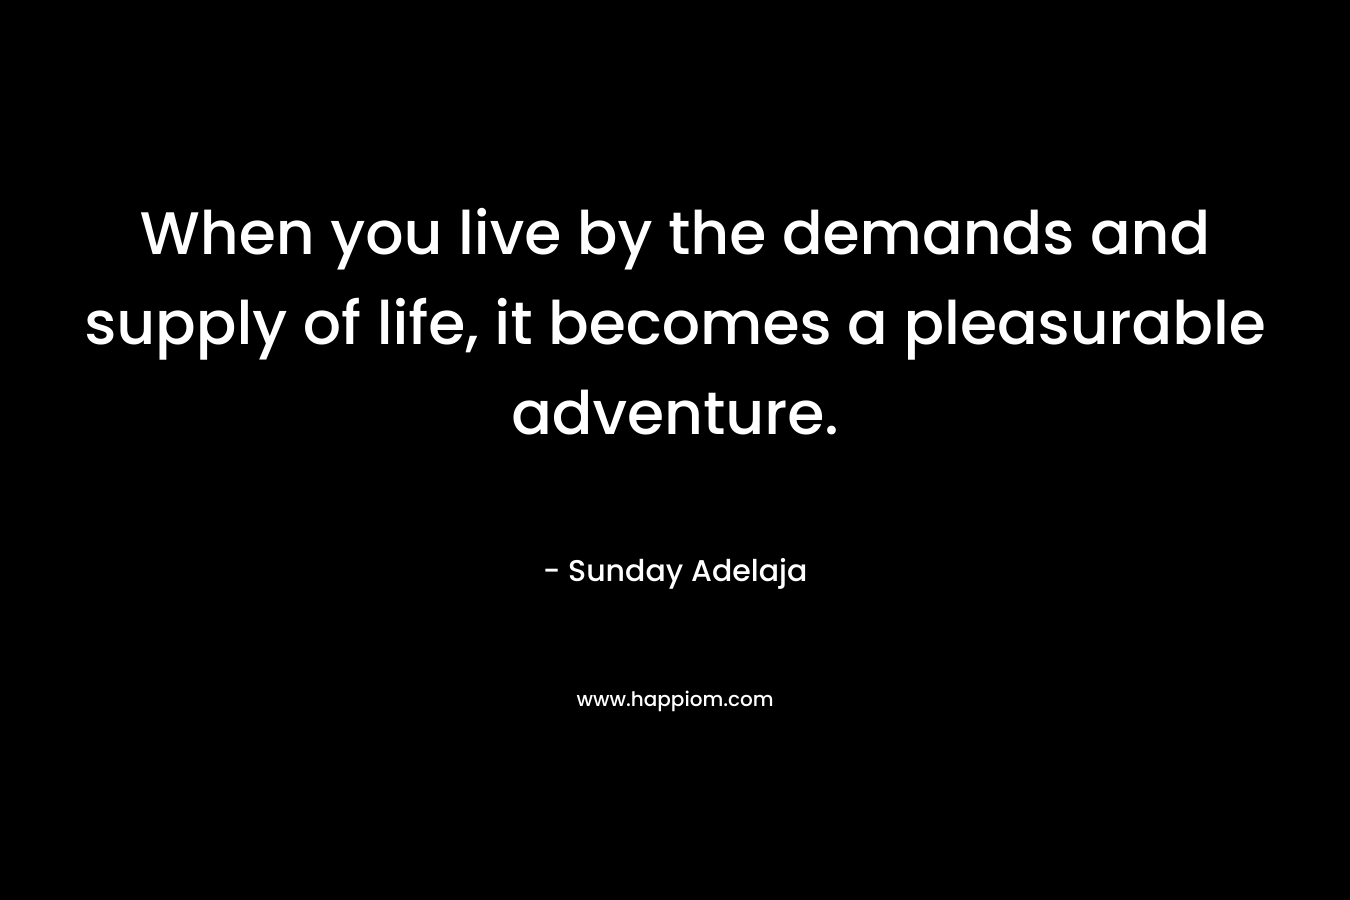 When you live by the demands and supply of life, it becomes a pleasurable adventure.